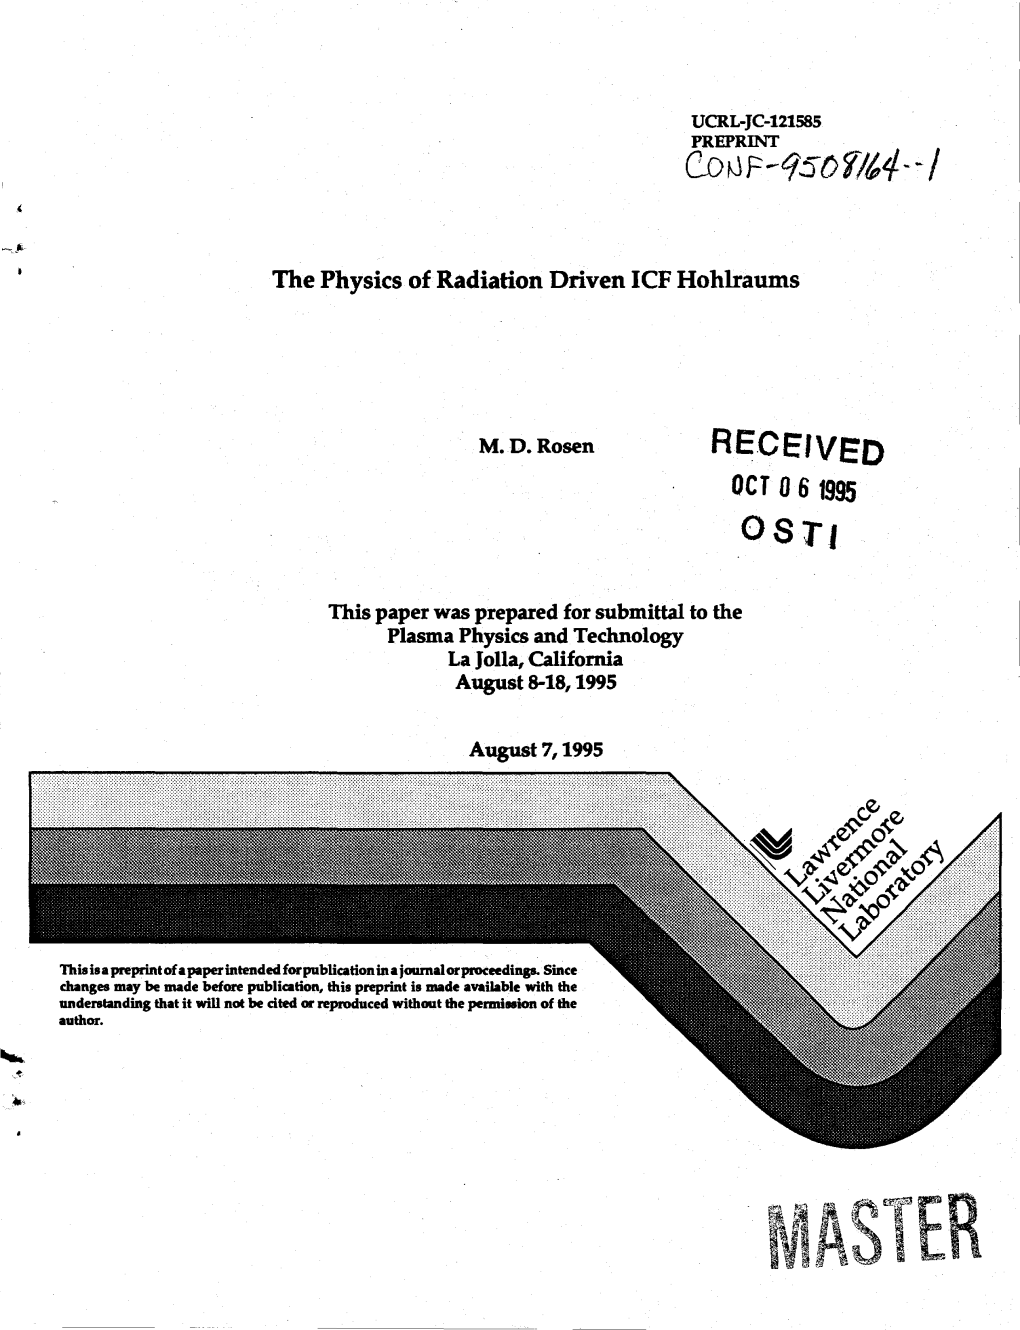 The Physics of Radiation Driven ICF Hohlraums